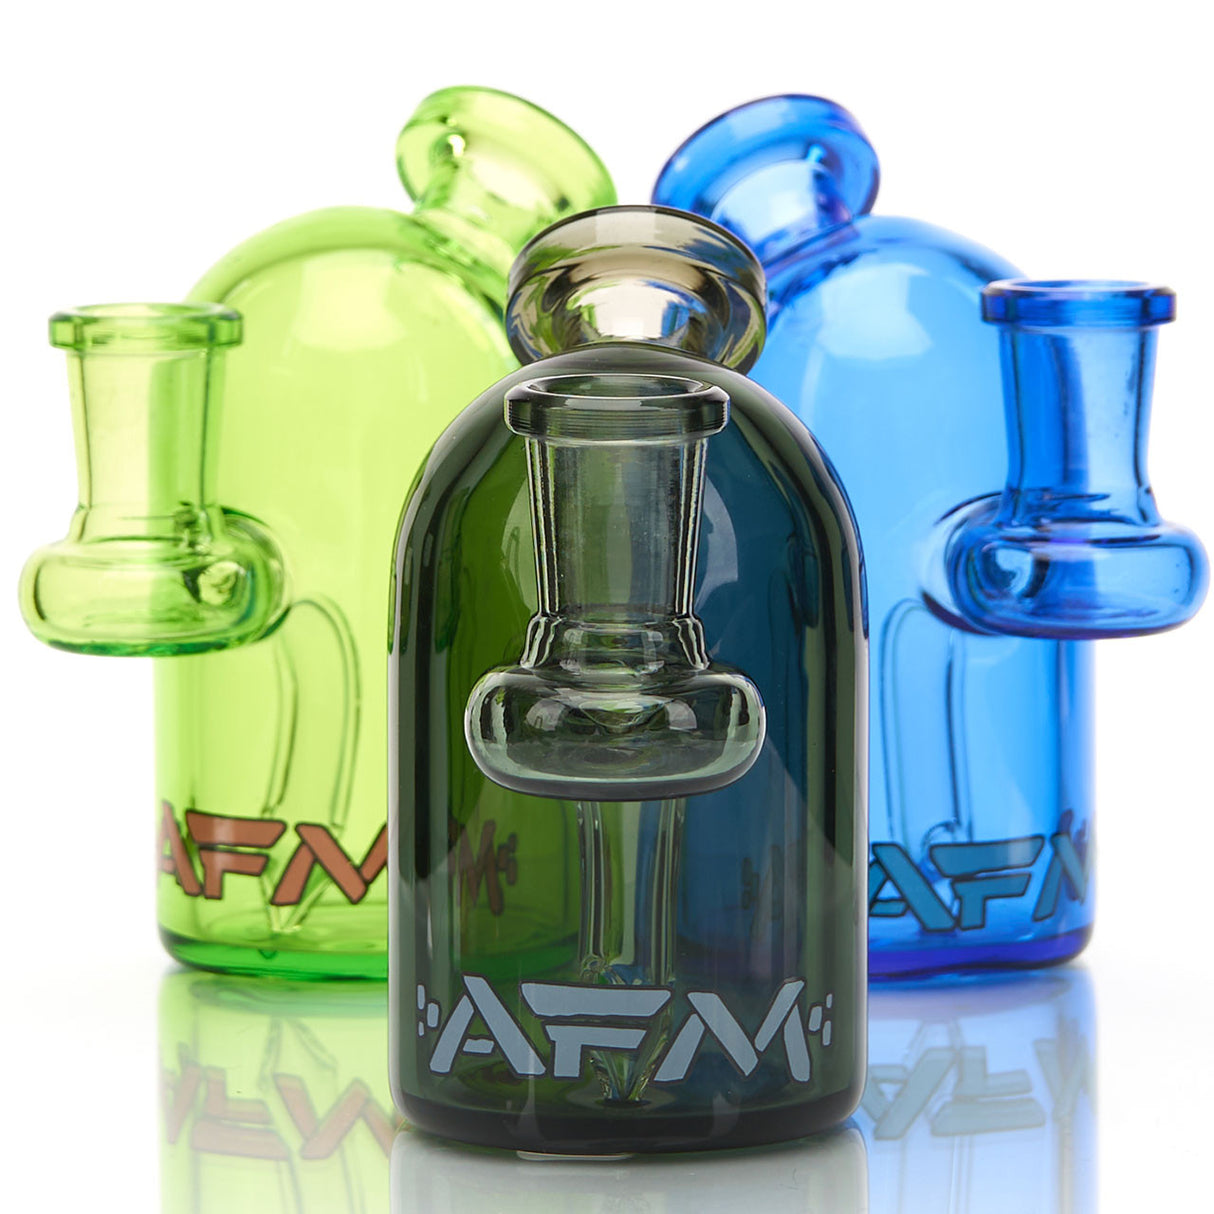 AFM Bullet Mini Concentrate Rig made from full color 4mm Borosilicate Glass.